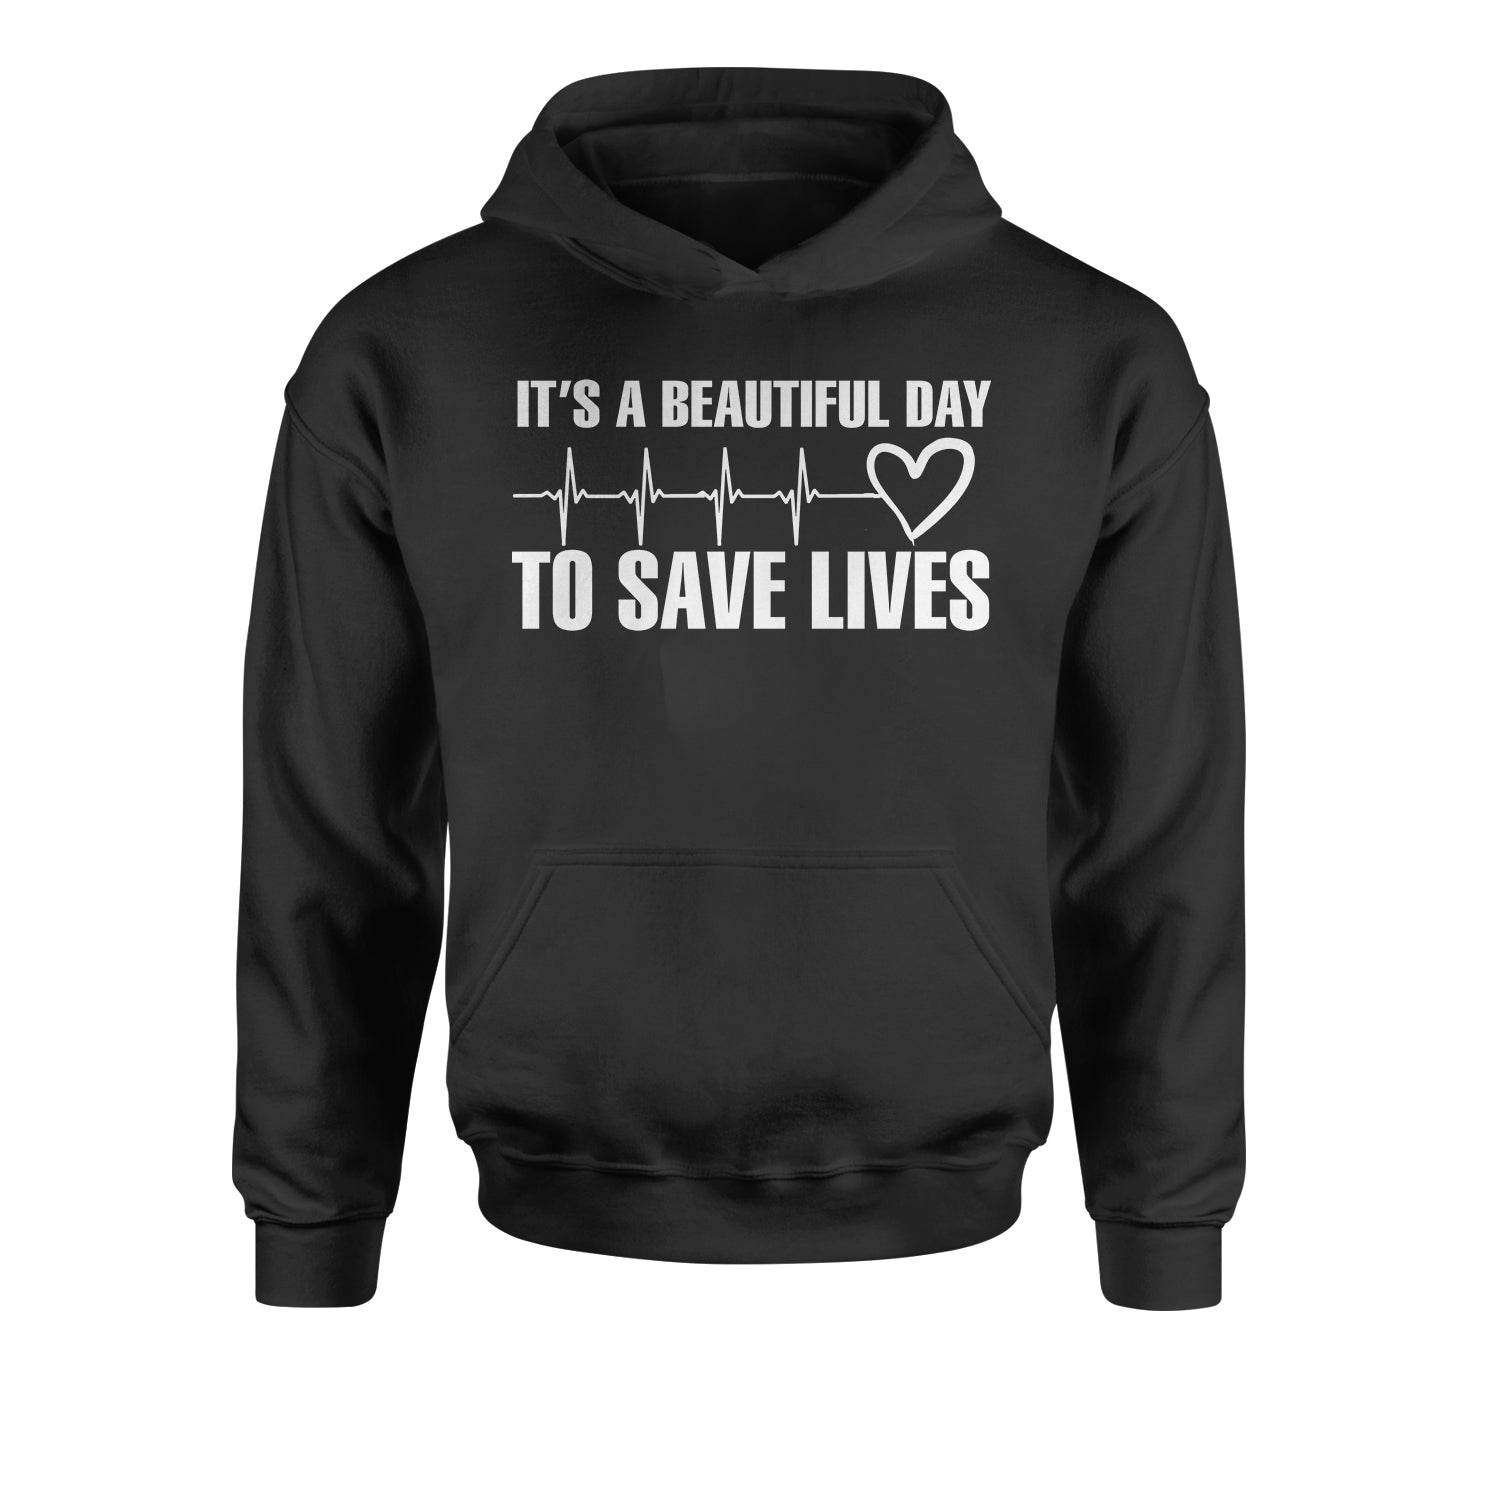 It's A Beautiful Day To Save Lives (White Print) Youth-Sized Hoodie #expressiontees by Expression Tees